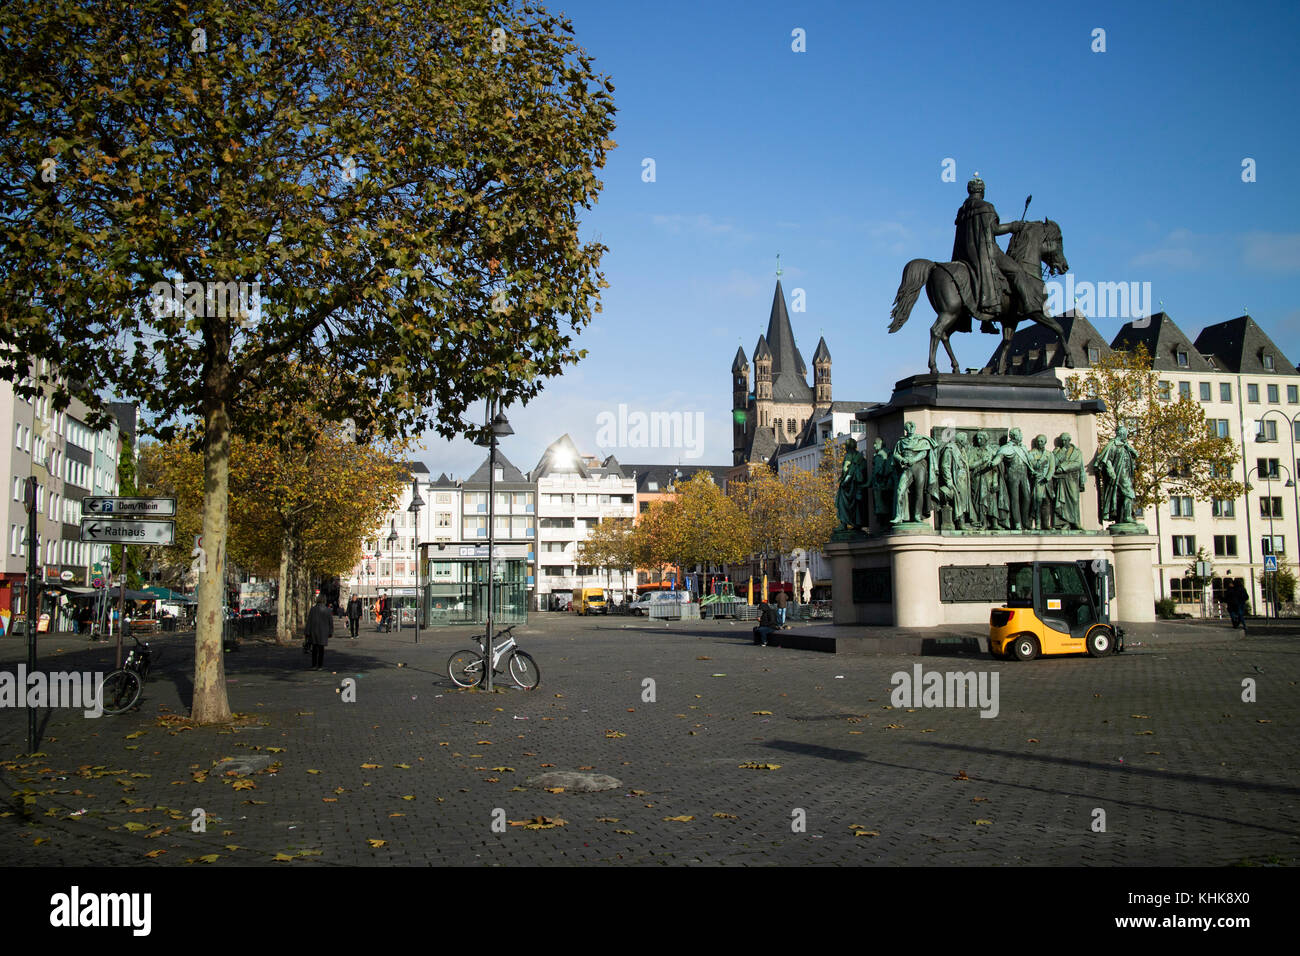 Heumarkt Cologne, Innenstadt central city district and largest city in the German federal State of North Rhine-Westphalia in Germany, Europe Stock Photo